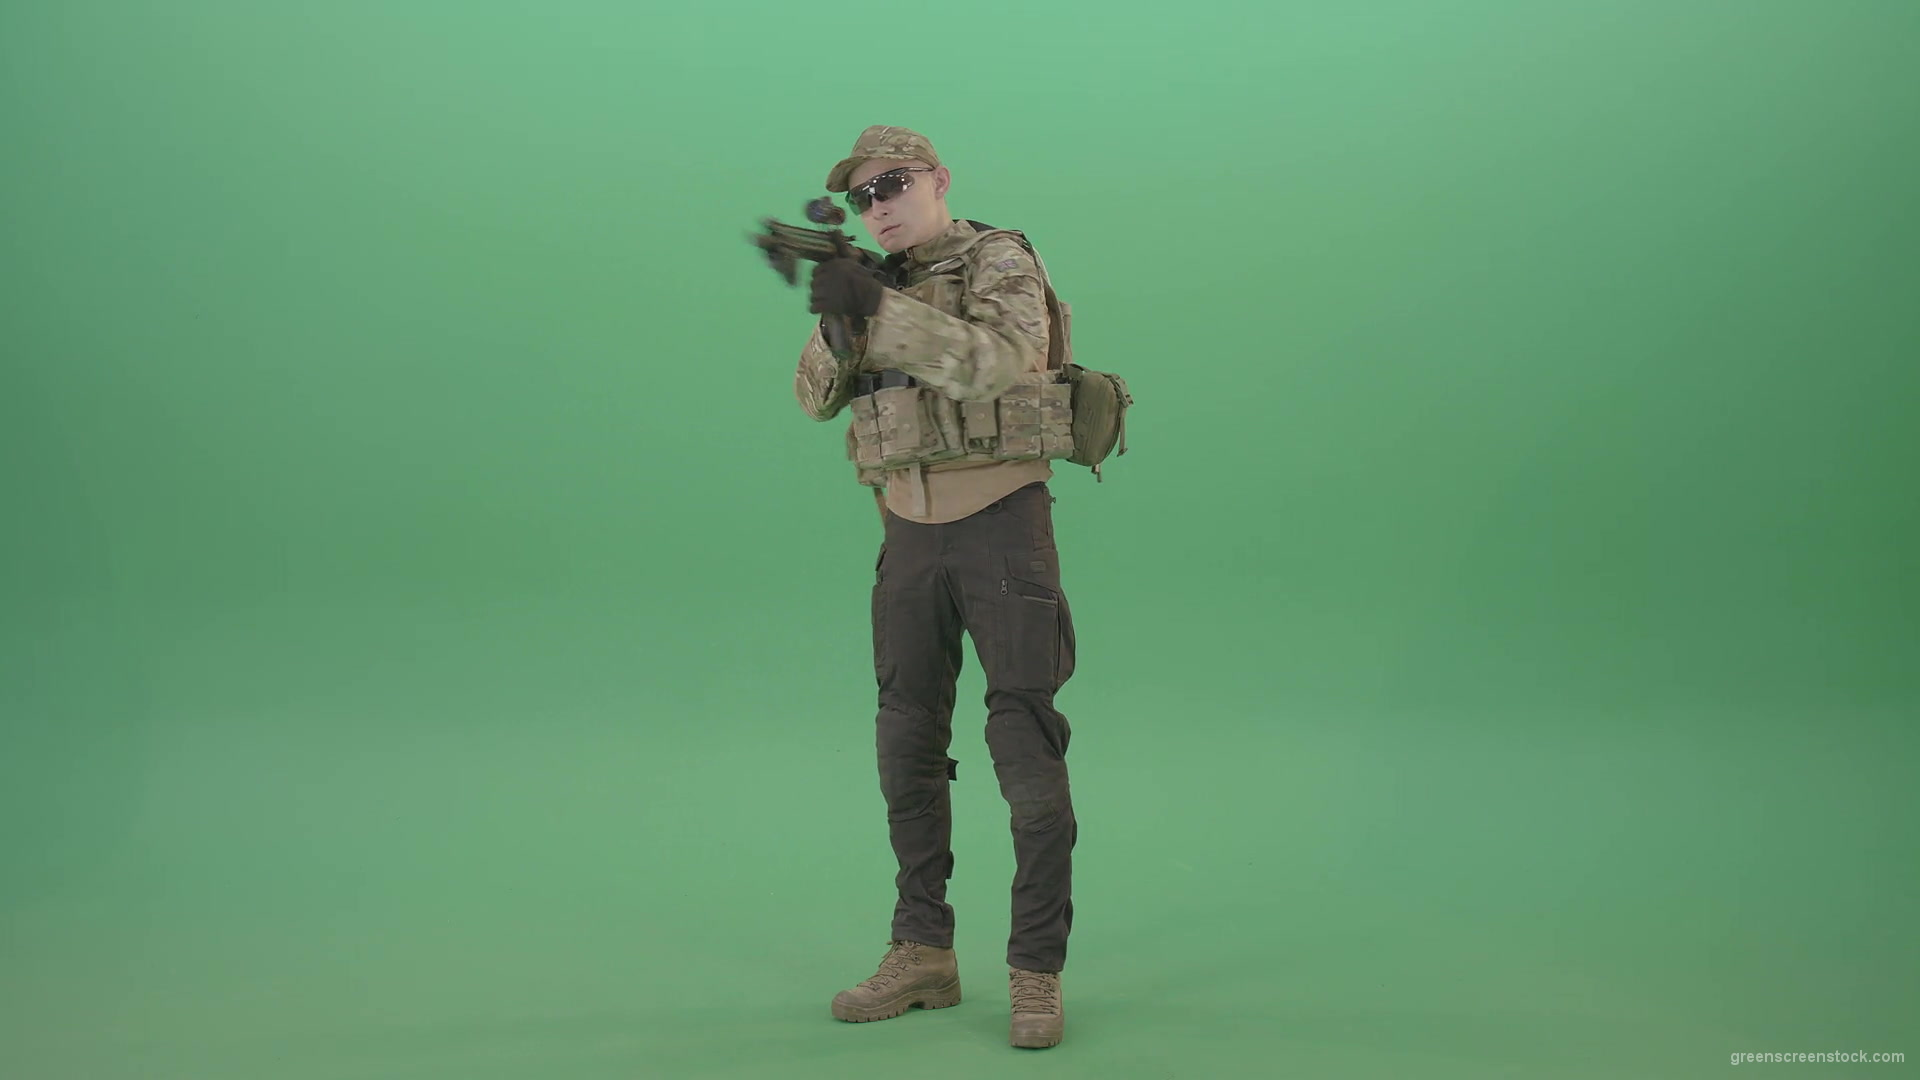 Counter-strike-army-police-man-shooting-enemy-from-machine-gun-in-Camouflage-uniform-on-green-screen-4K-Video-Footage-1920_005 Green Screen Stock